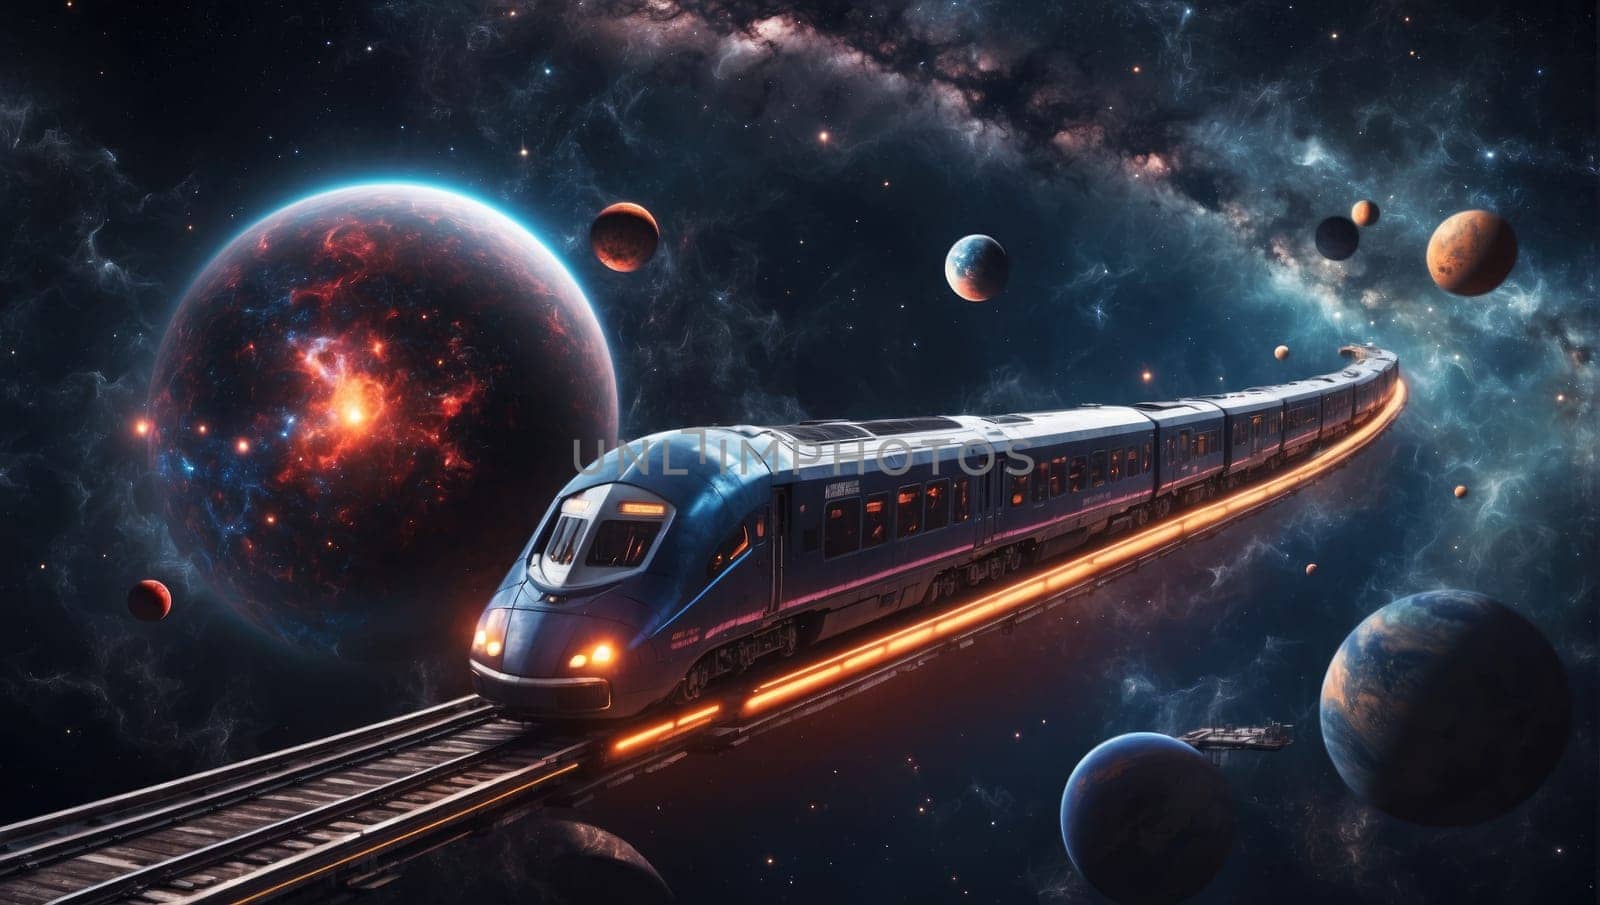 Traveling on an intergalactic train by applesstock